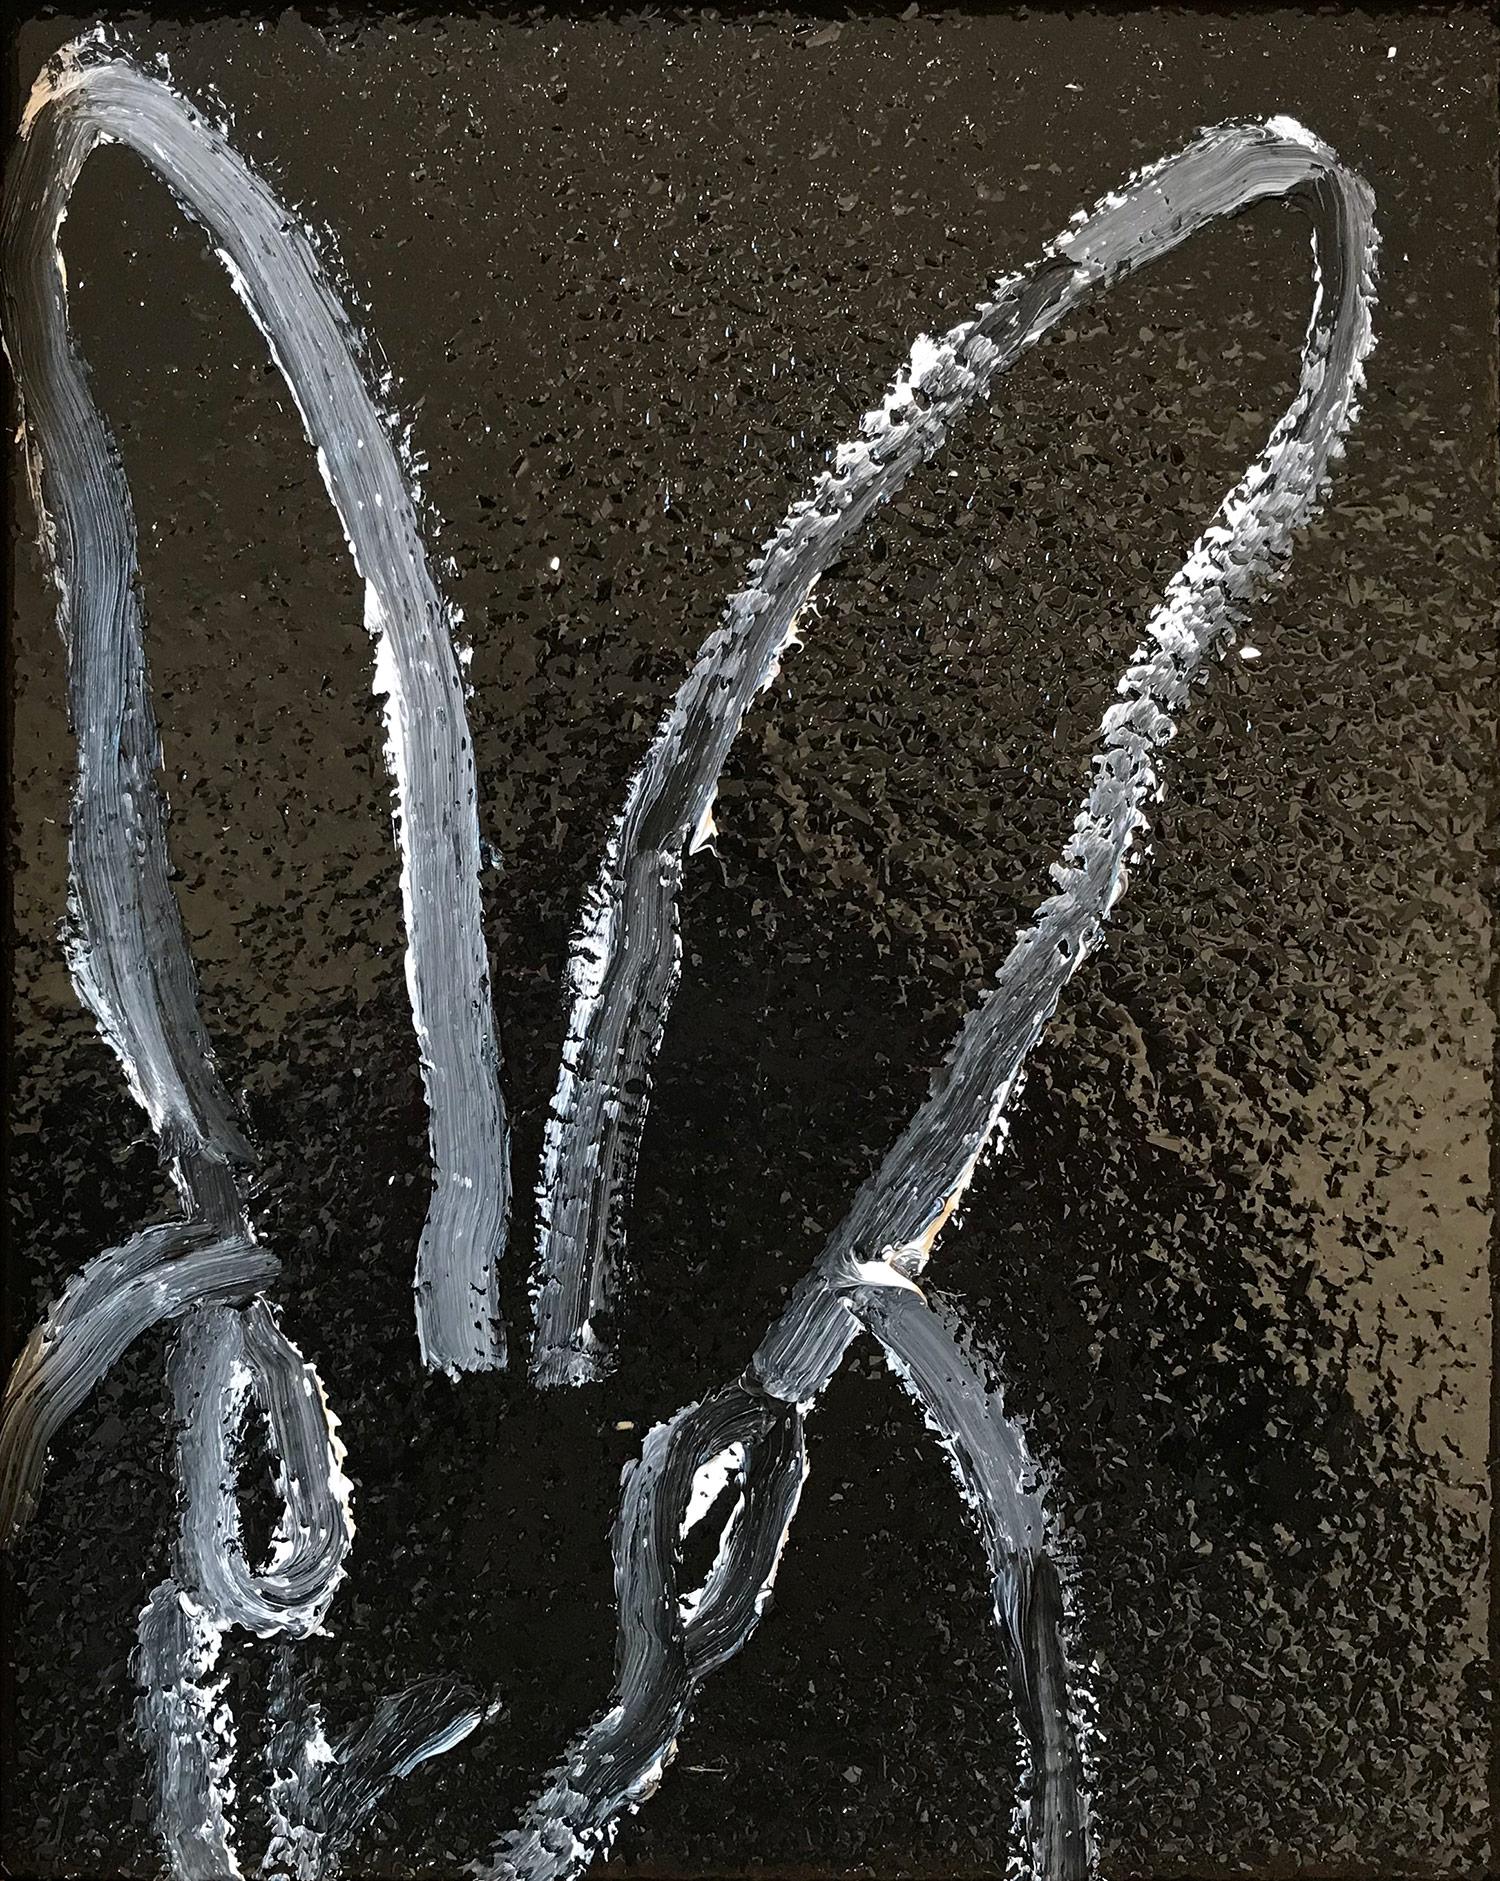 A wonderful composition of one of Slonem's most iconic subjects, Bunnies. This piece depicts a gestural figure of a white bunny on a black background with thick white paint and then encases the piece in diamond dust, which adds another level of